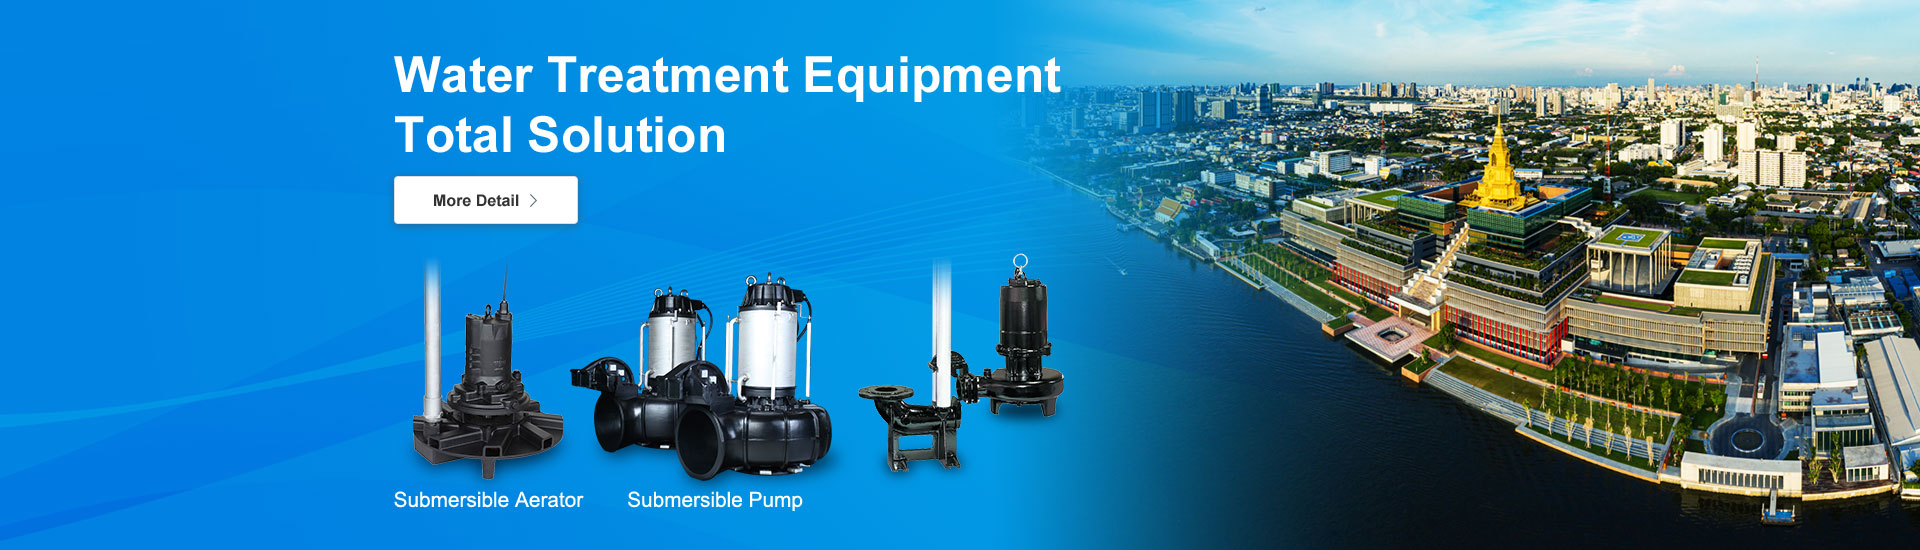 Water Treatment Equipment Total Solution Submersible Aerator Submersible Pump More Detail